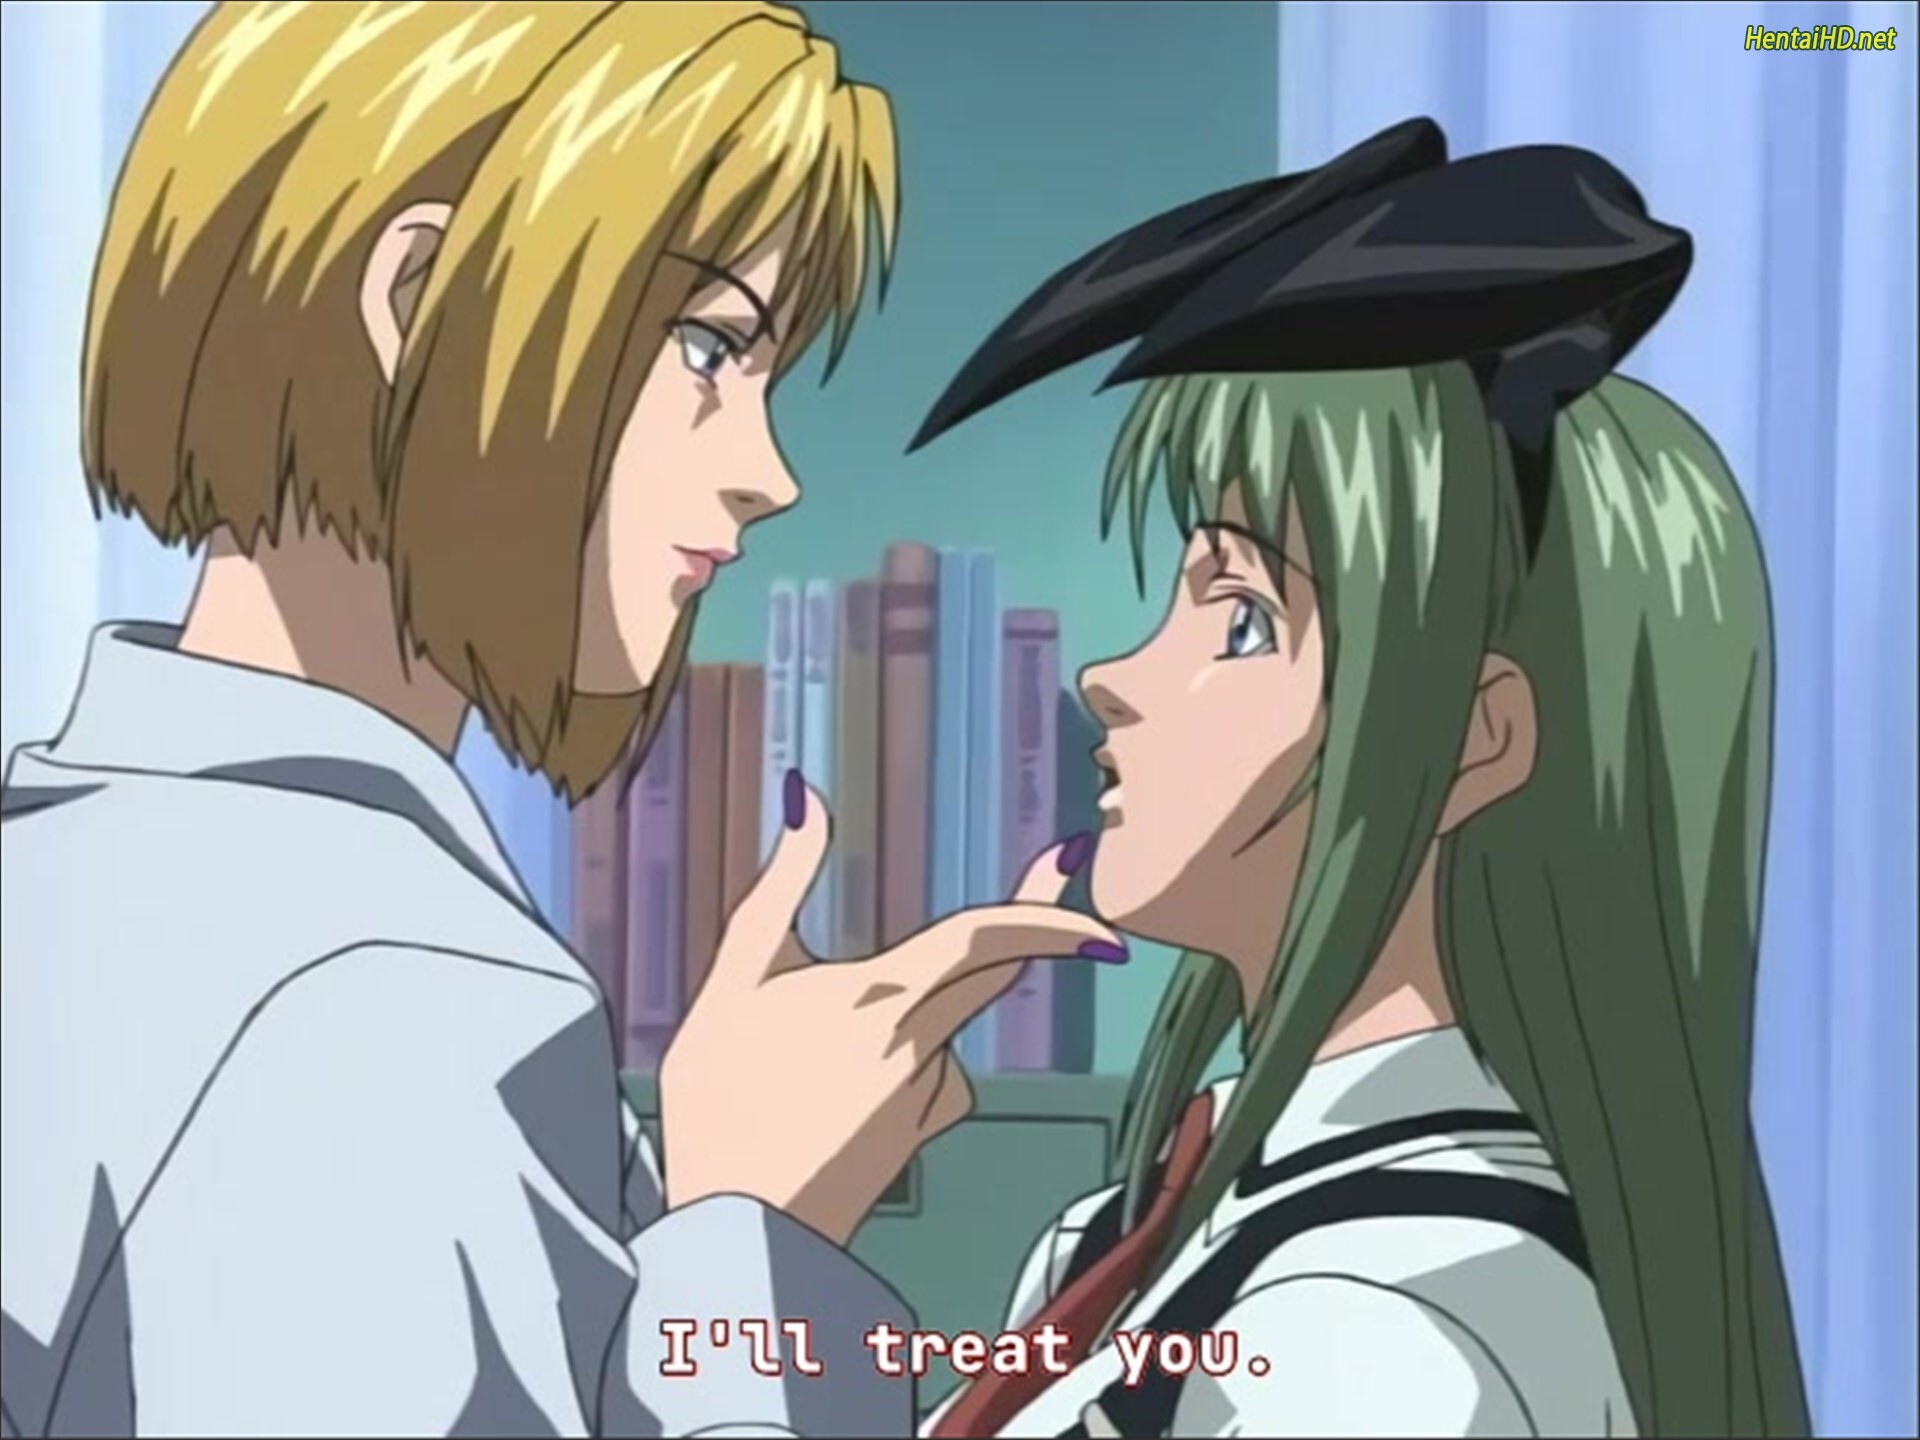 coral howe recommends Bible Black Episode 1 English Sub